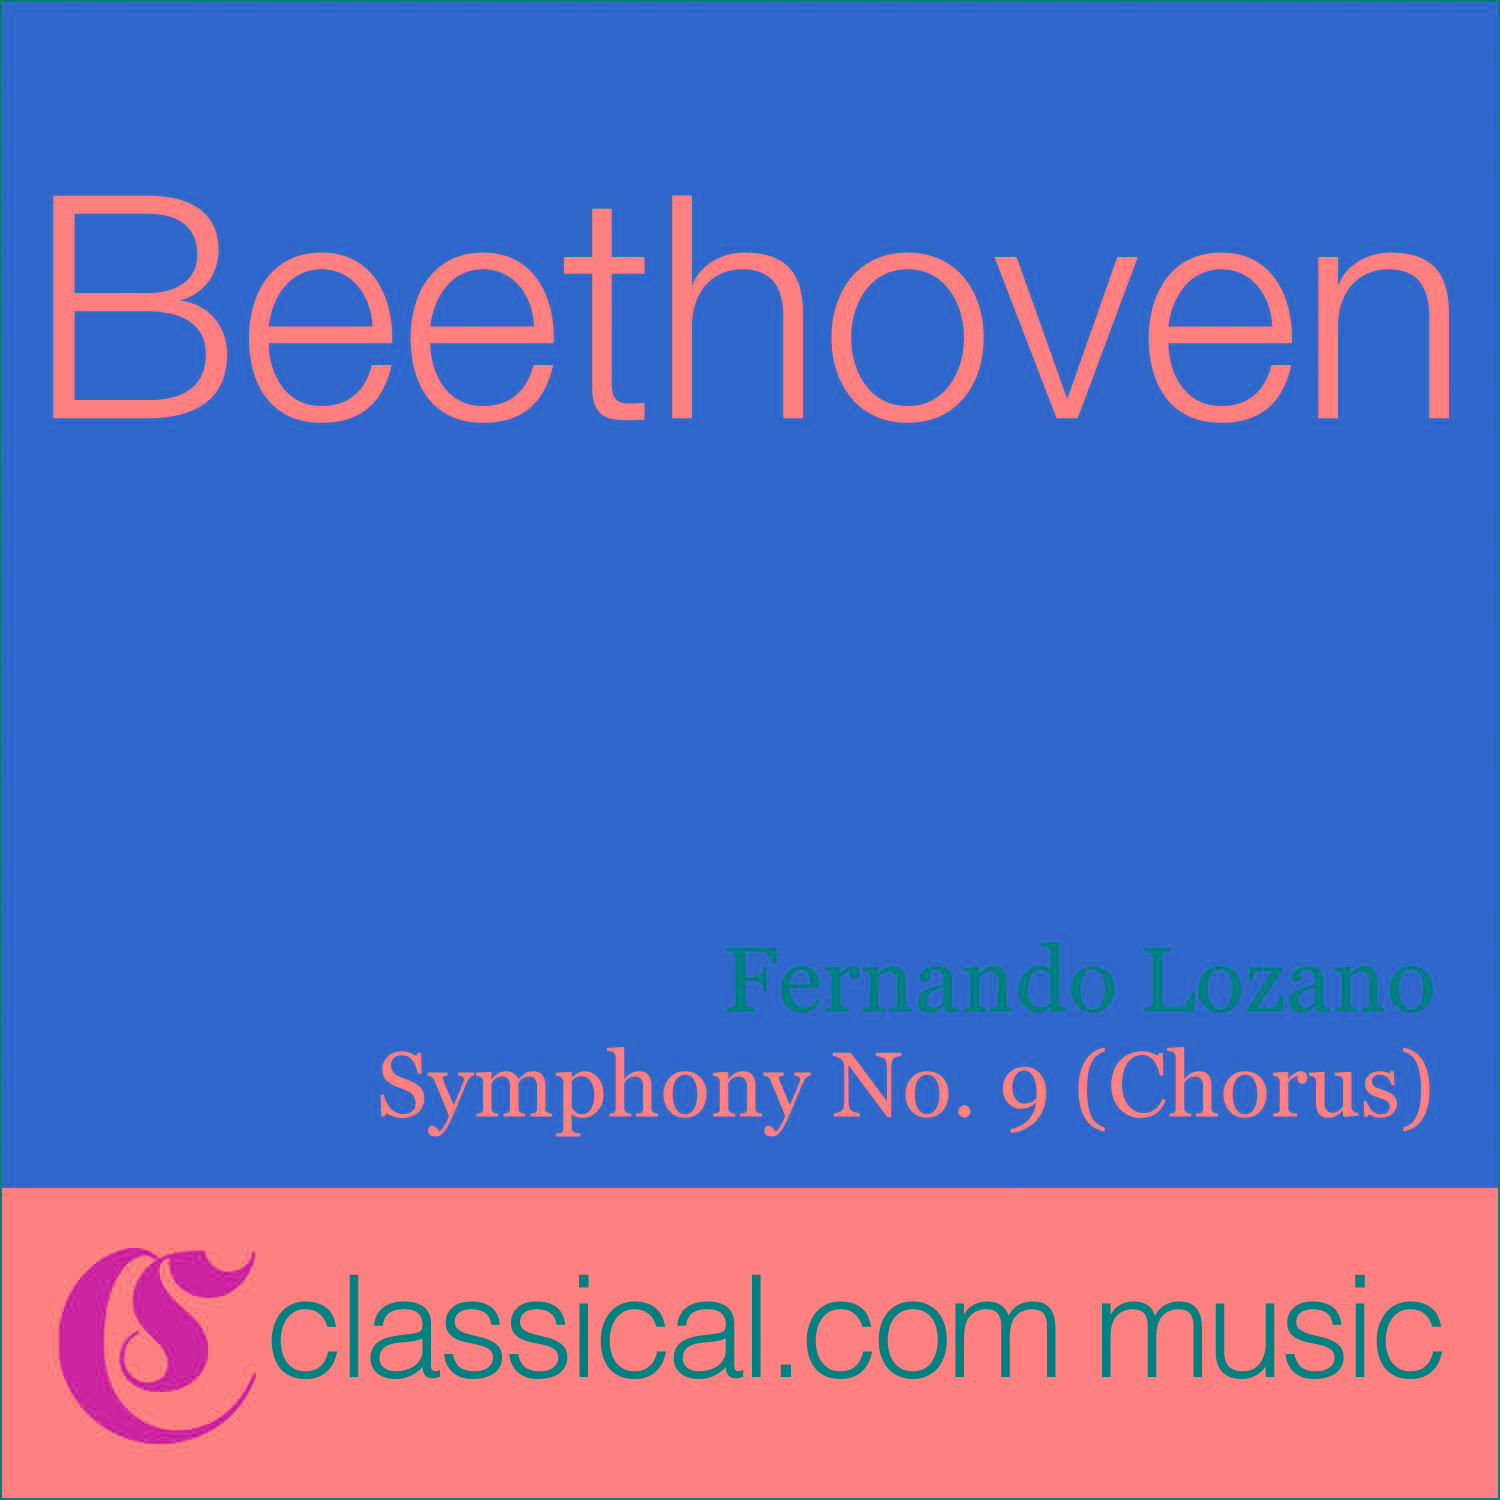 Symphony No. 9 in D minor, Op. 125 (Choral Symphony / Ode to Joy) - Adagio e molto cantabile